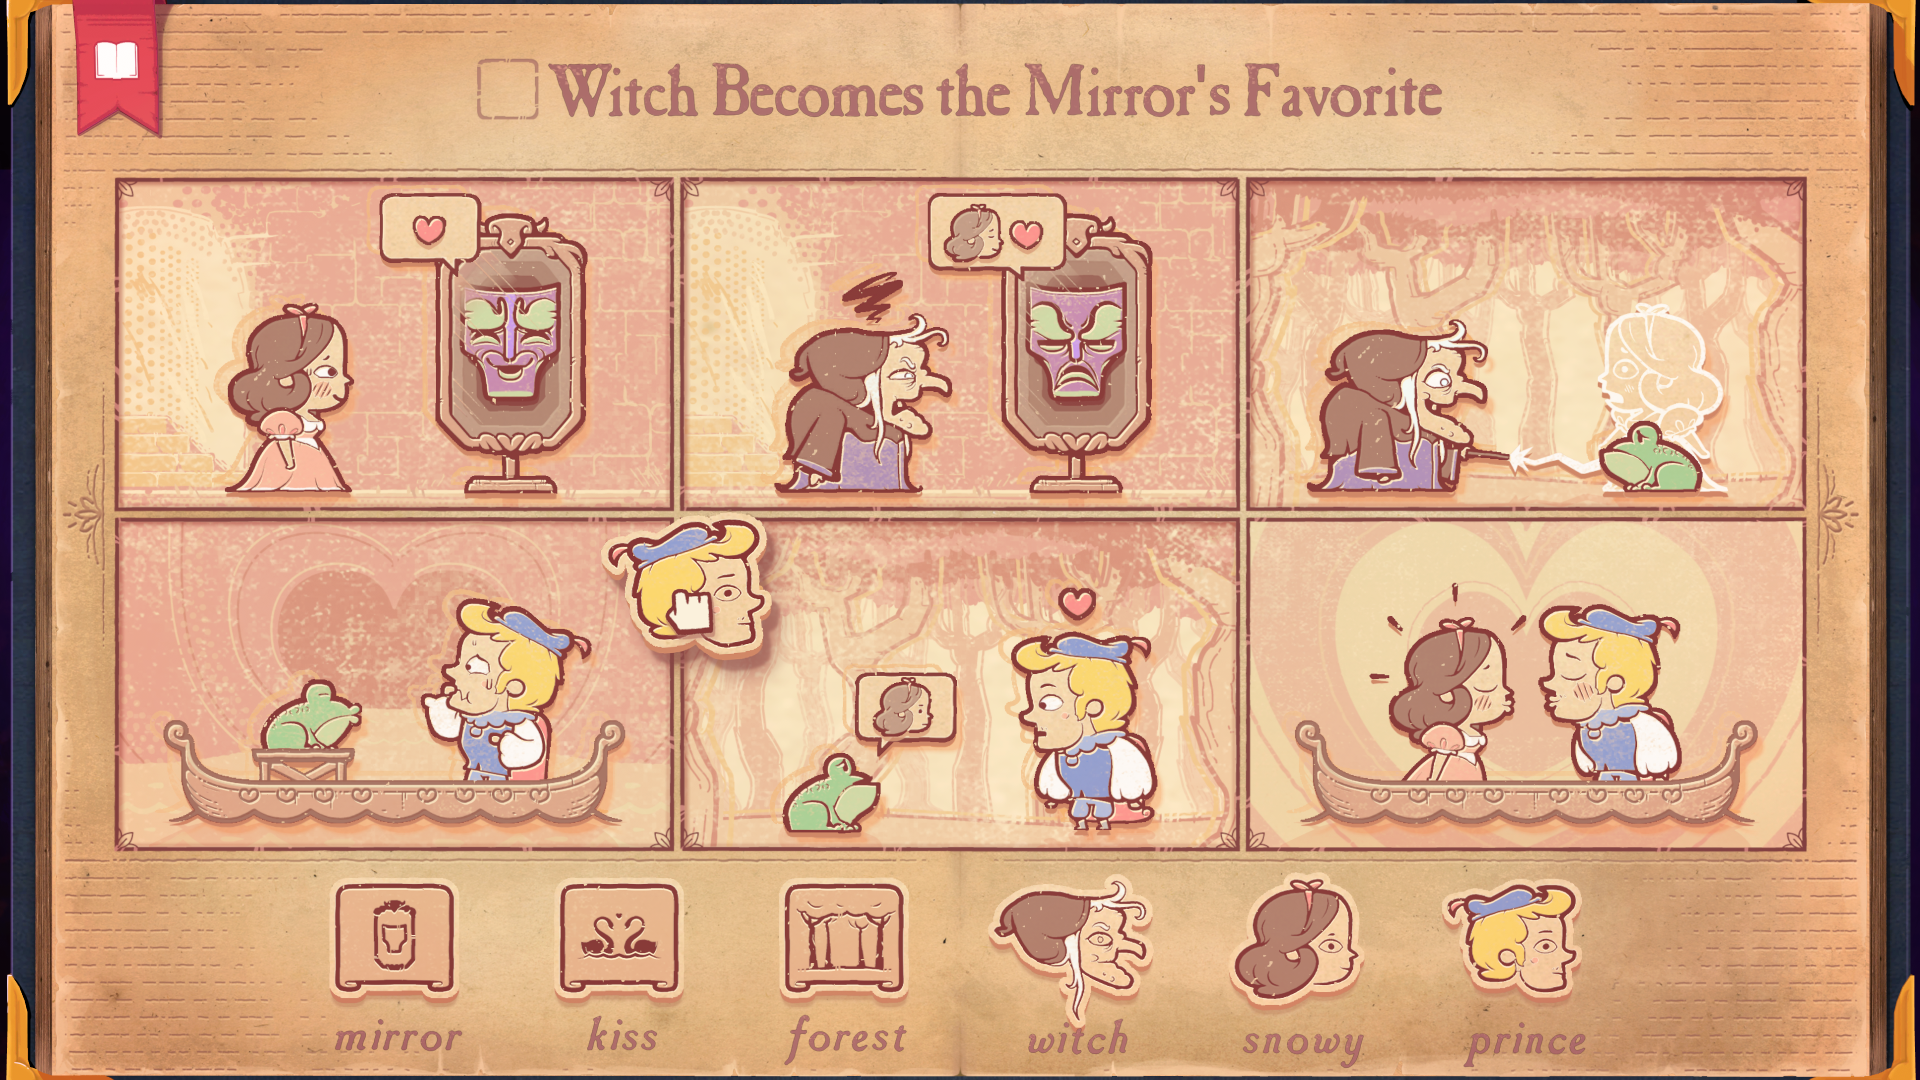 An unsolved Storyteller puzzle shows a Witch trying to become a Mirror's favorite.